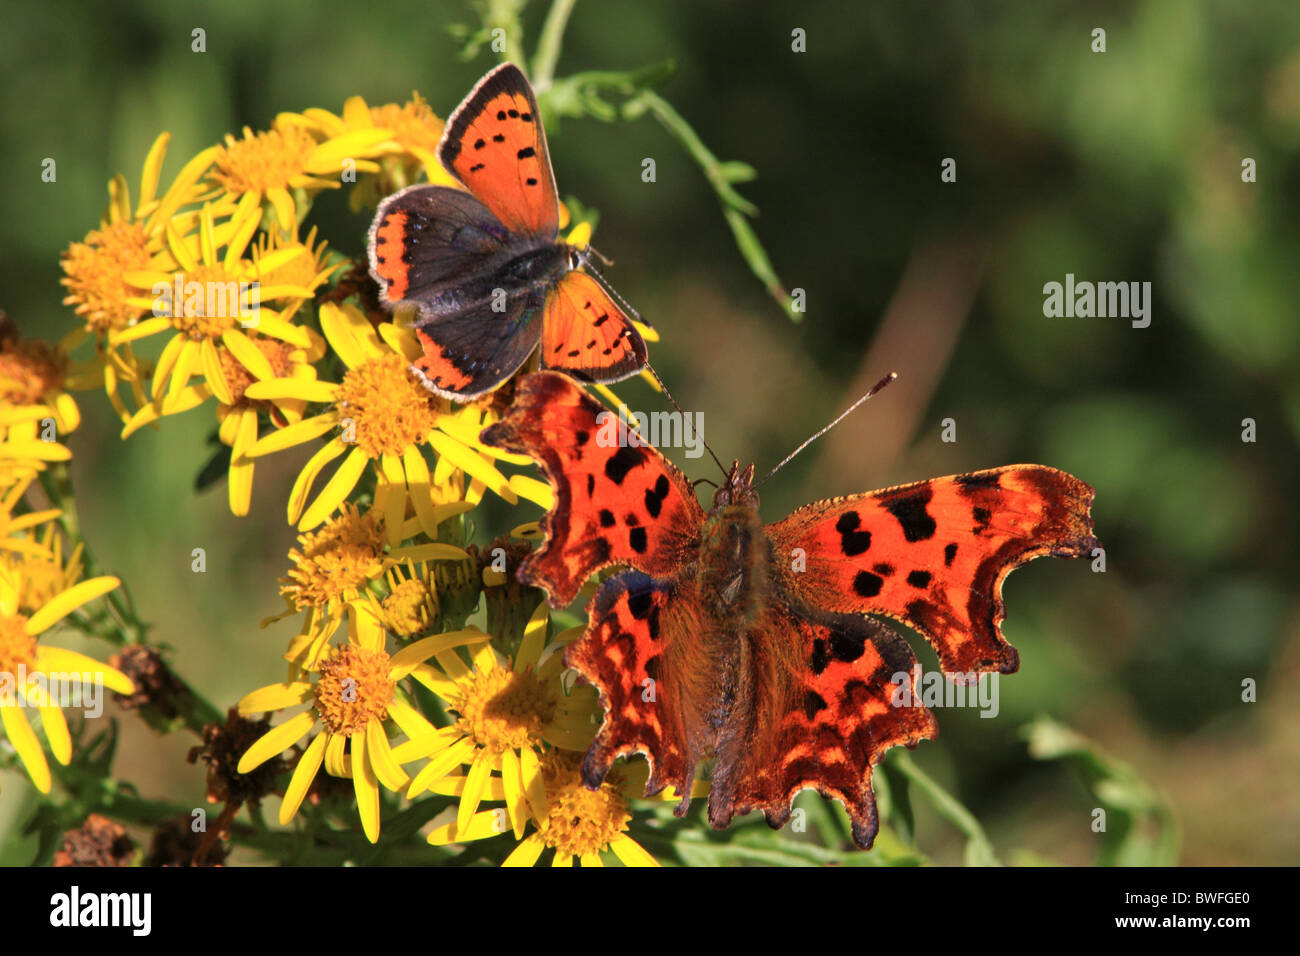 UK Butterflies Small Copper ( Lycaena phlaeas ) and Comma (Polygonia c-album ) on wild flower Ragwort Stock Photo